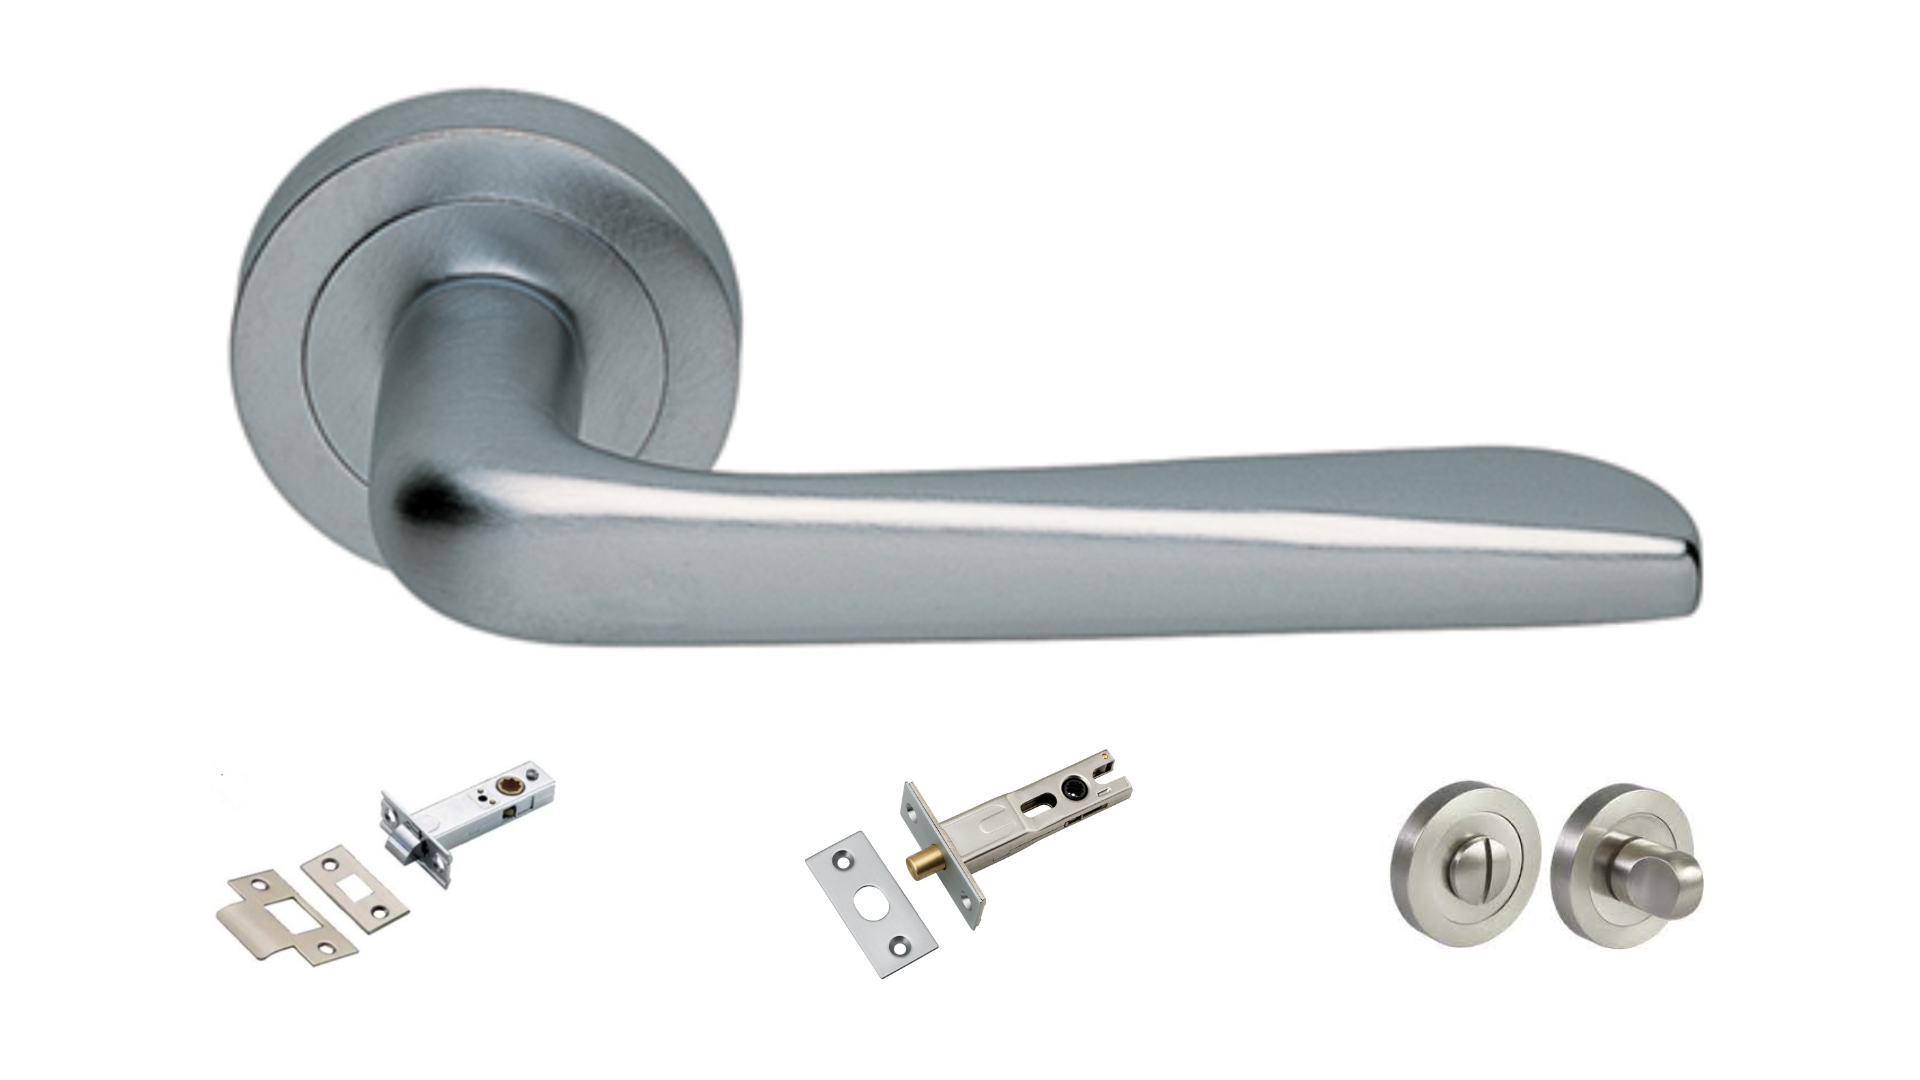 Product picture of the Petra Satin Chrome Door Handle with accessories tubular latch, privacy turn and release, and a privacy bolt on a white background.